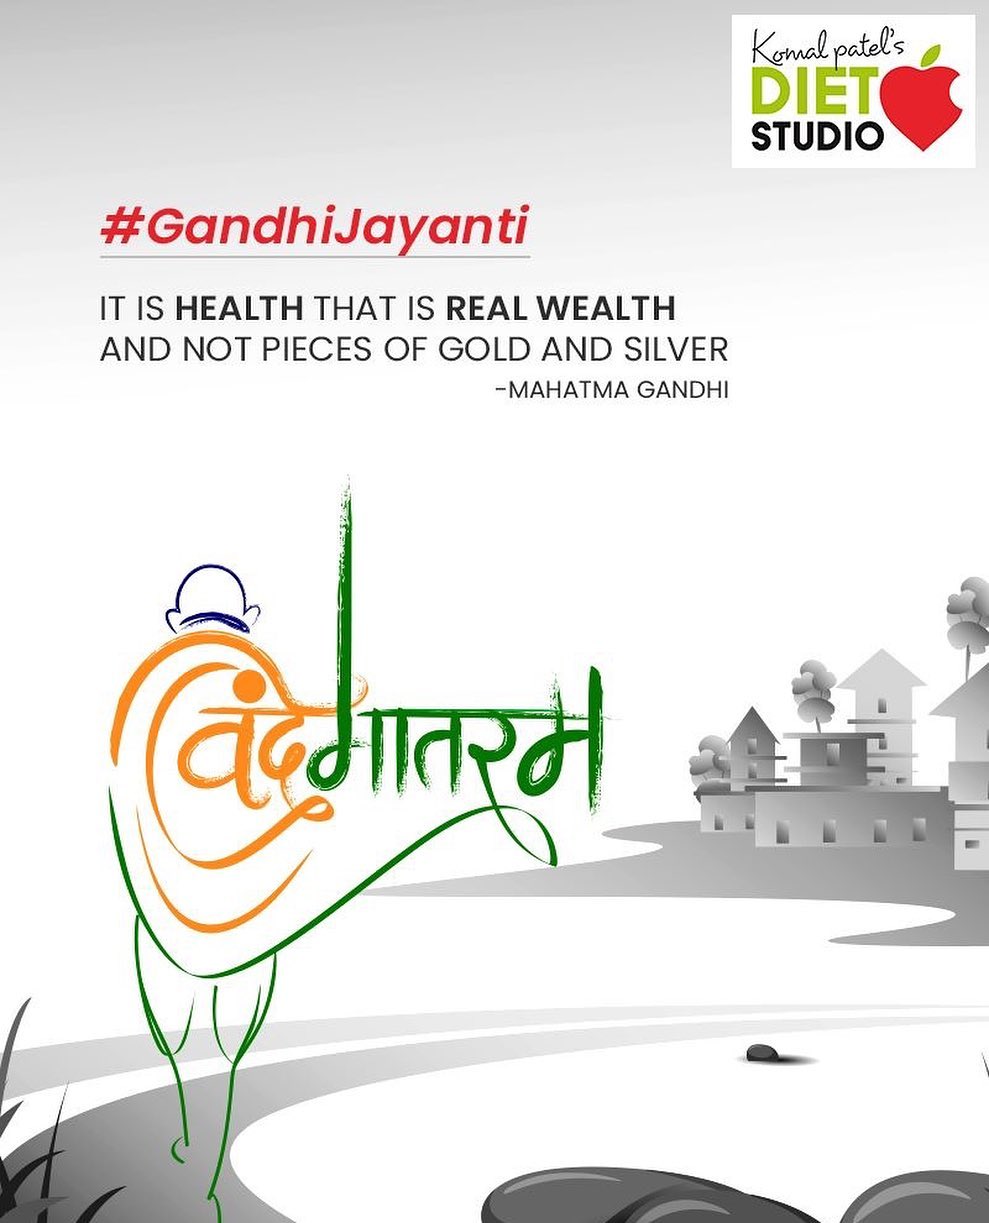 It is healthy that is real wealth and not pieces of gold and silver - Mahatma Gandhi 
#GandhiJayanthi #GandhiJayanthi2019  #MahatmaGandhi #Gandhi150 #MohandasKaramchandGandhi #komalpatel #diet #goodfood #eathealthy #goodhealth